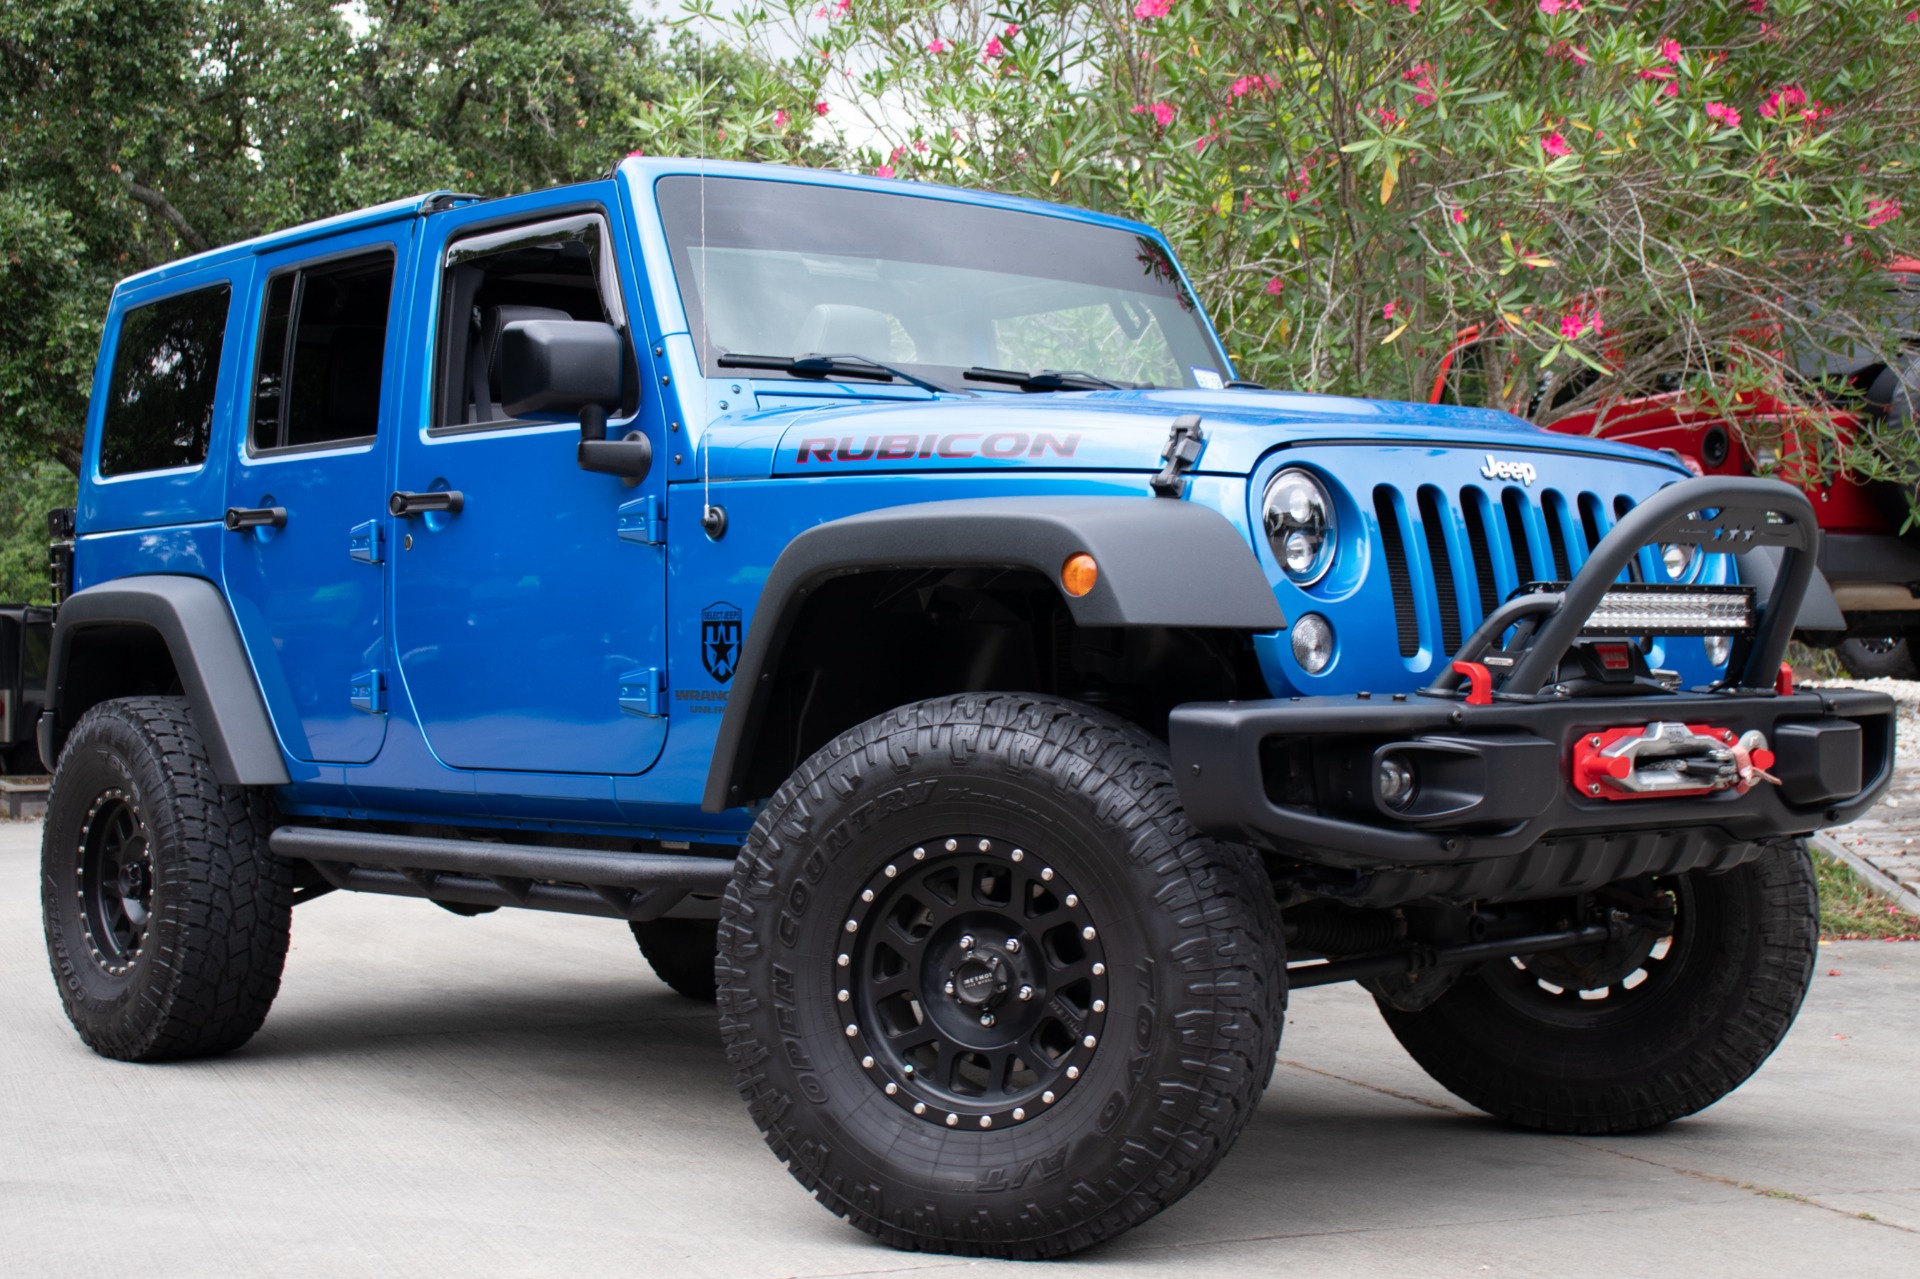 Used 2016 Jeep Wrangler Unlimited Rubicon Hard Rock For Sale 37 995 